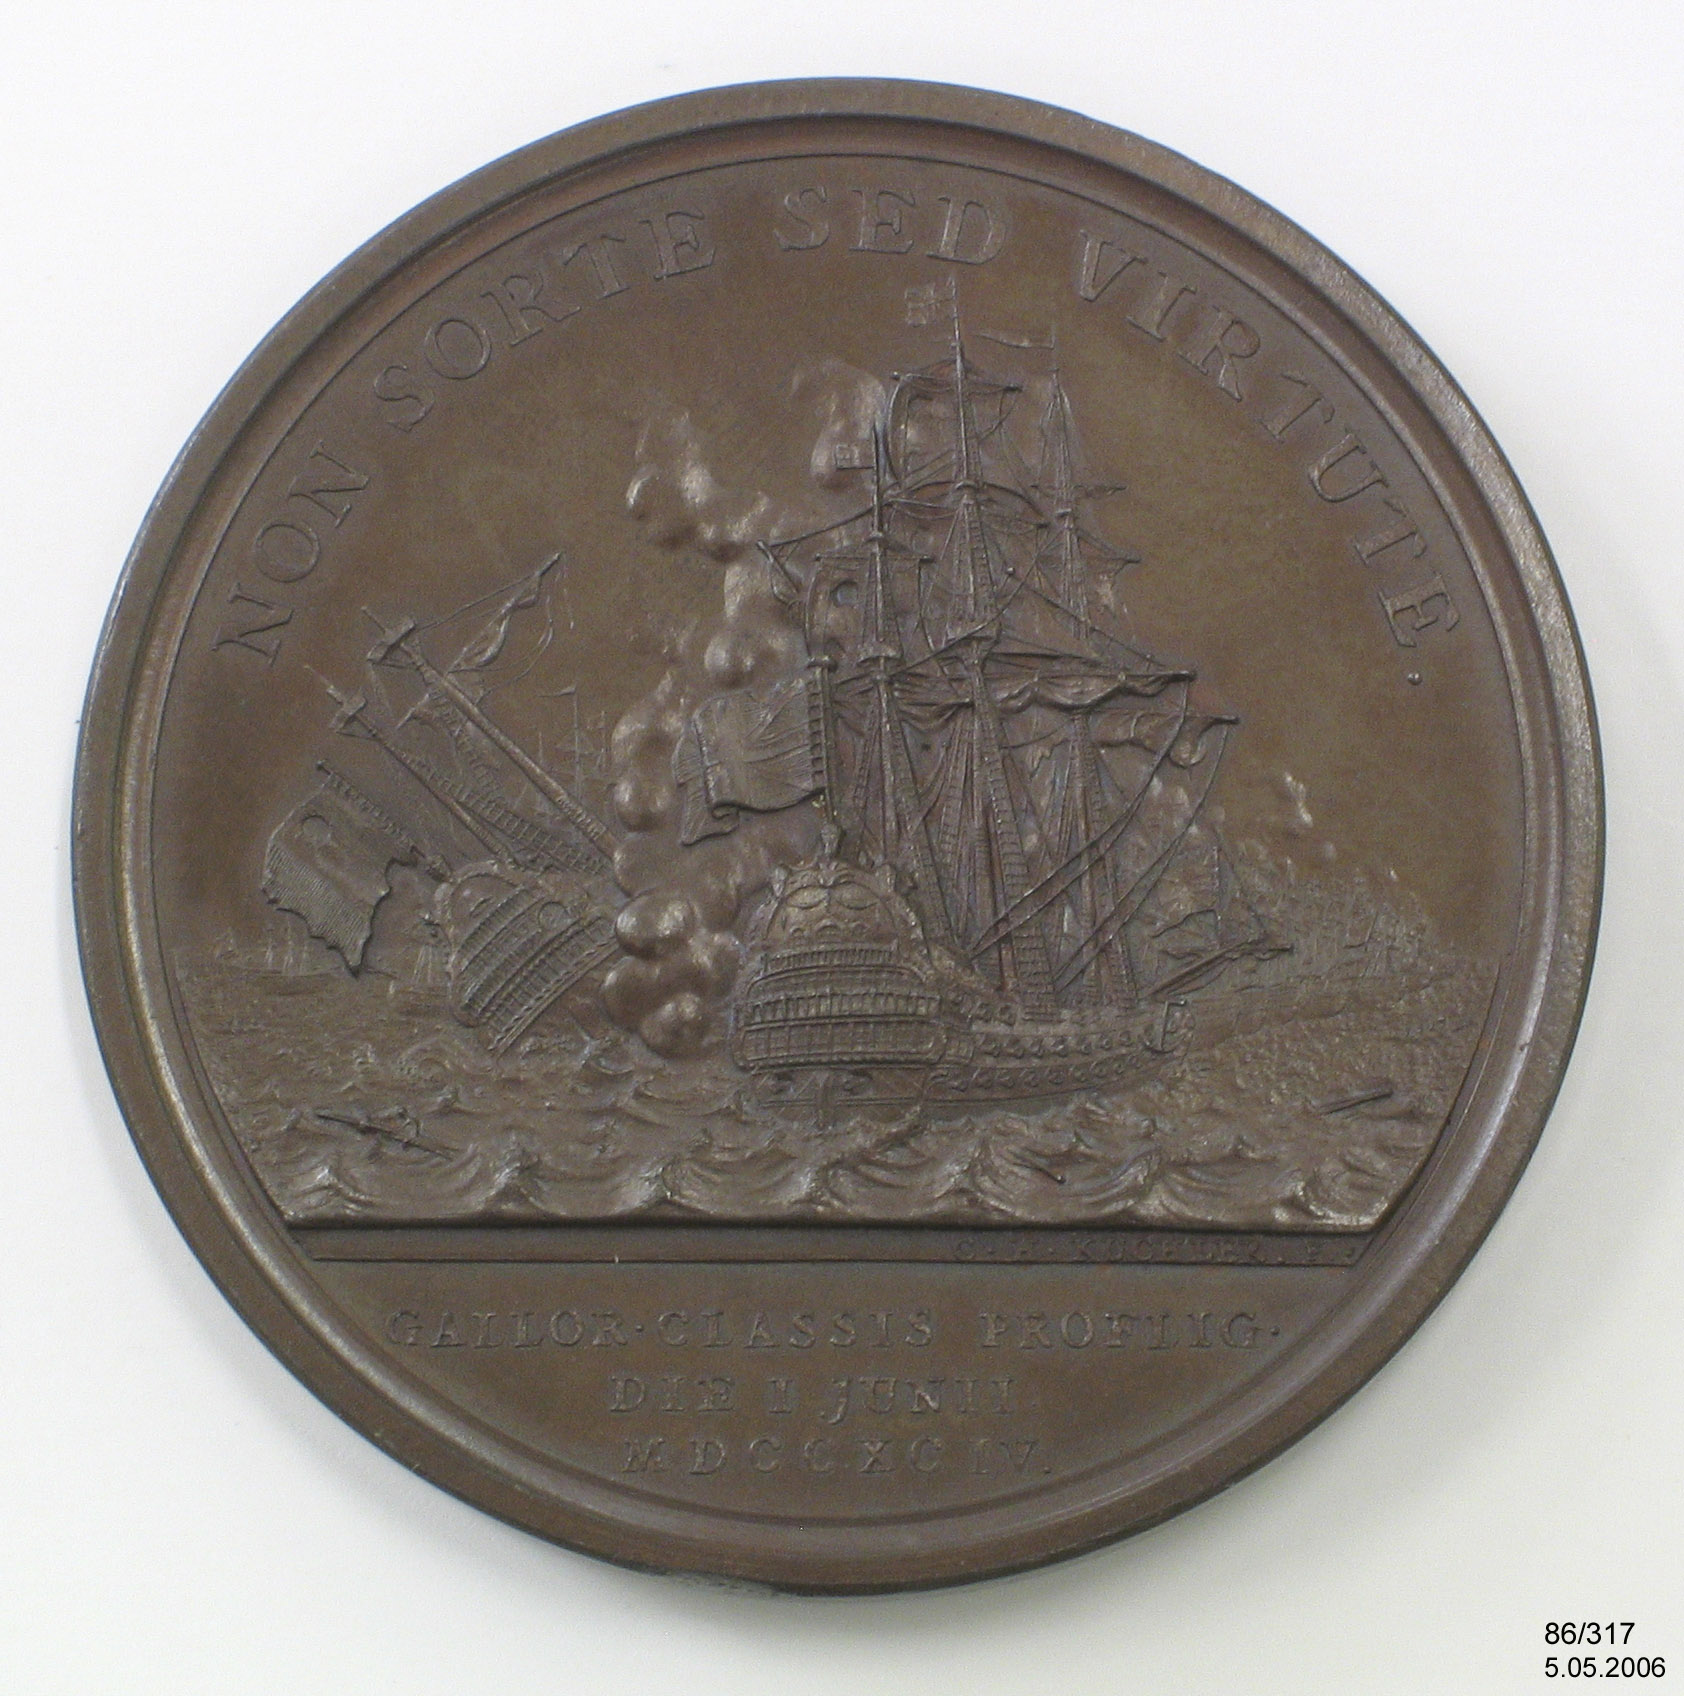 Medal commemorating Admiral Richard Howe and the Battle of the Glorious First of June 1794